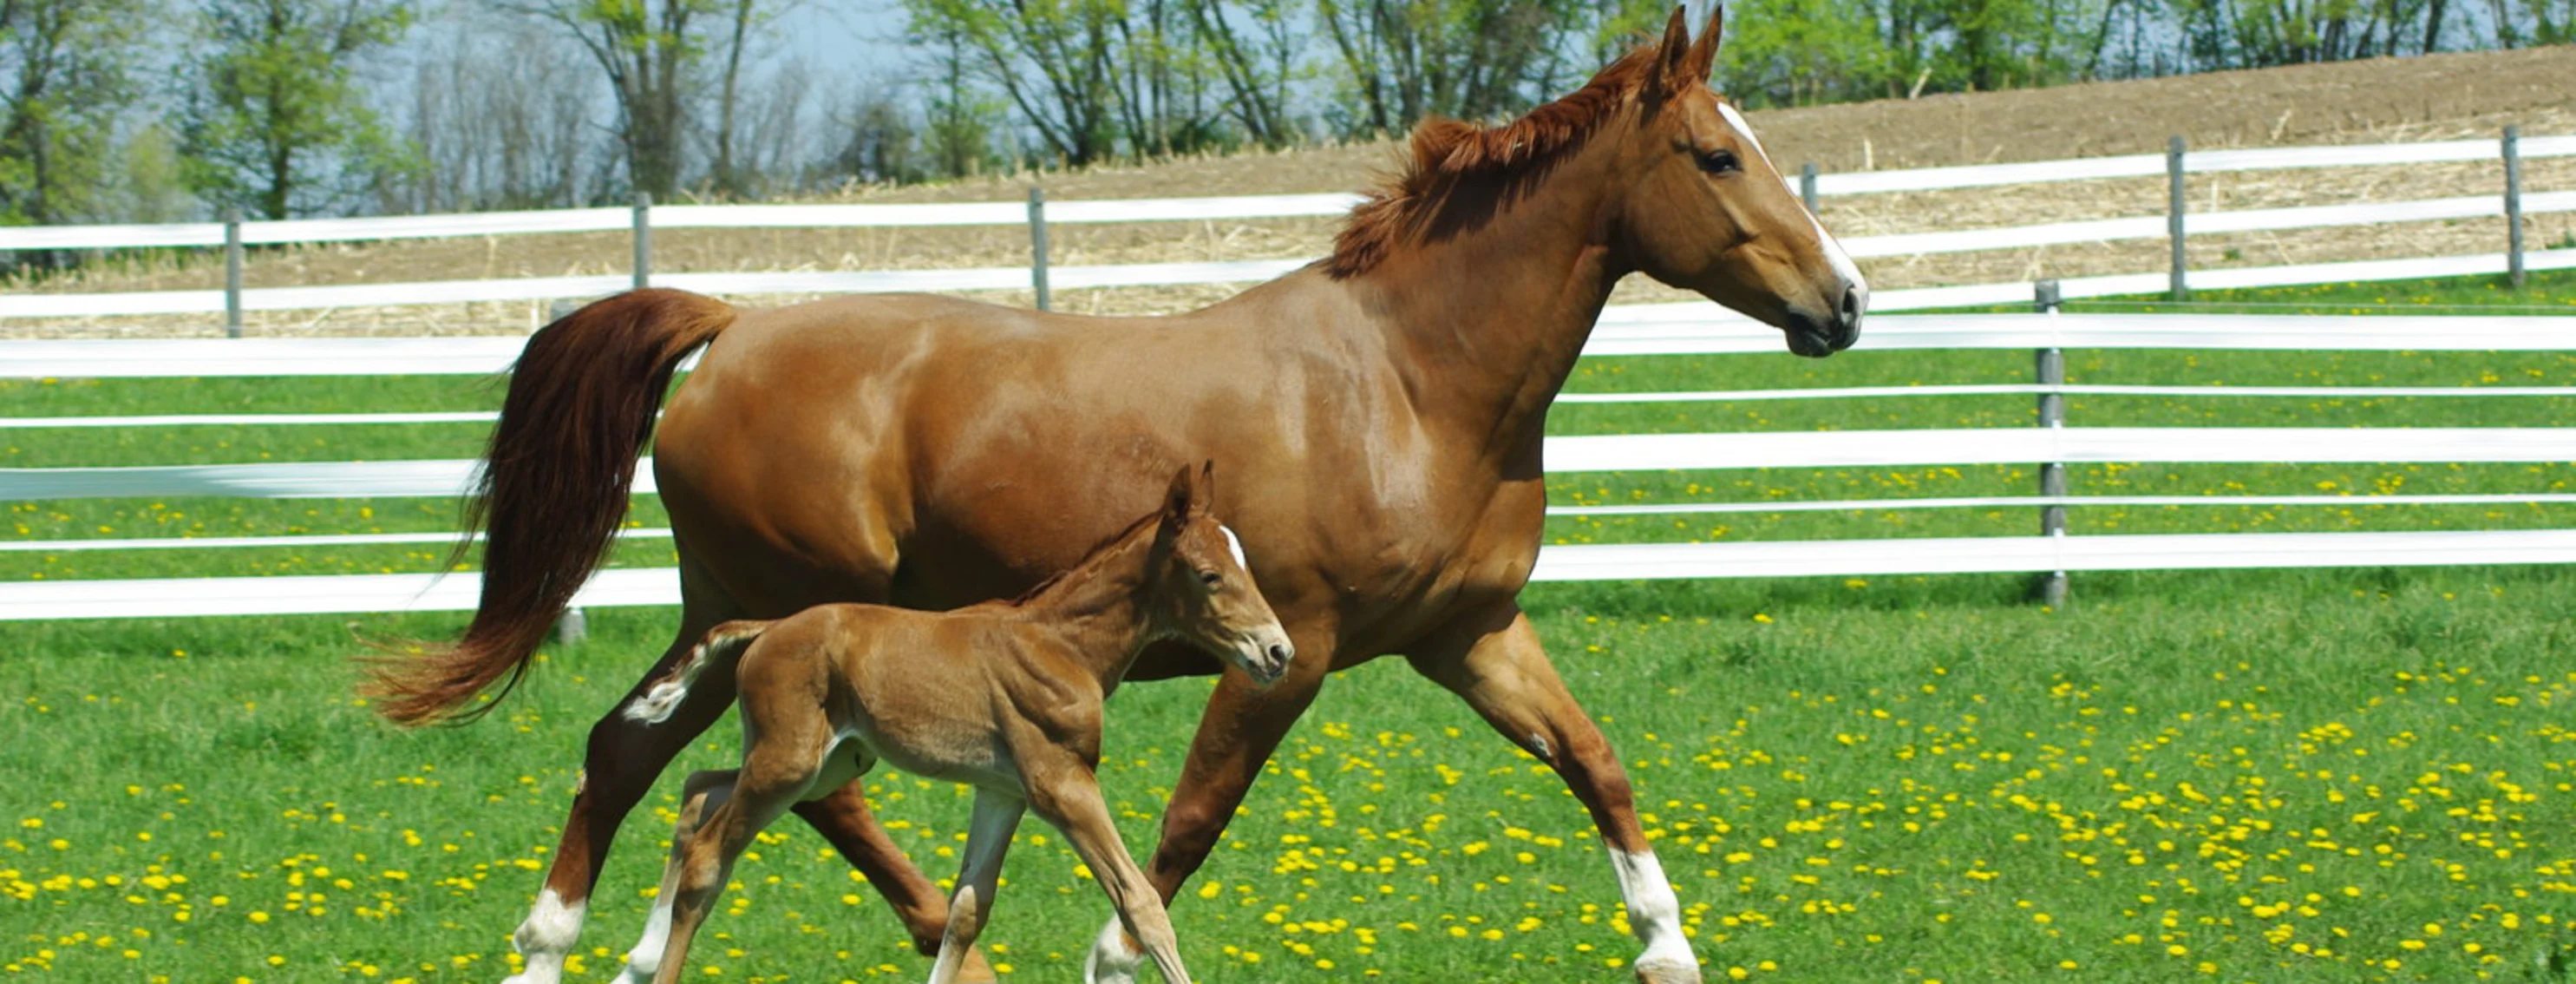 A photo of a mare walking through a pasture with a foal